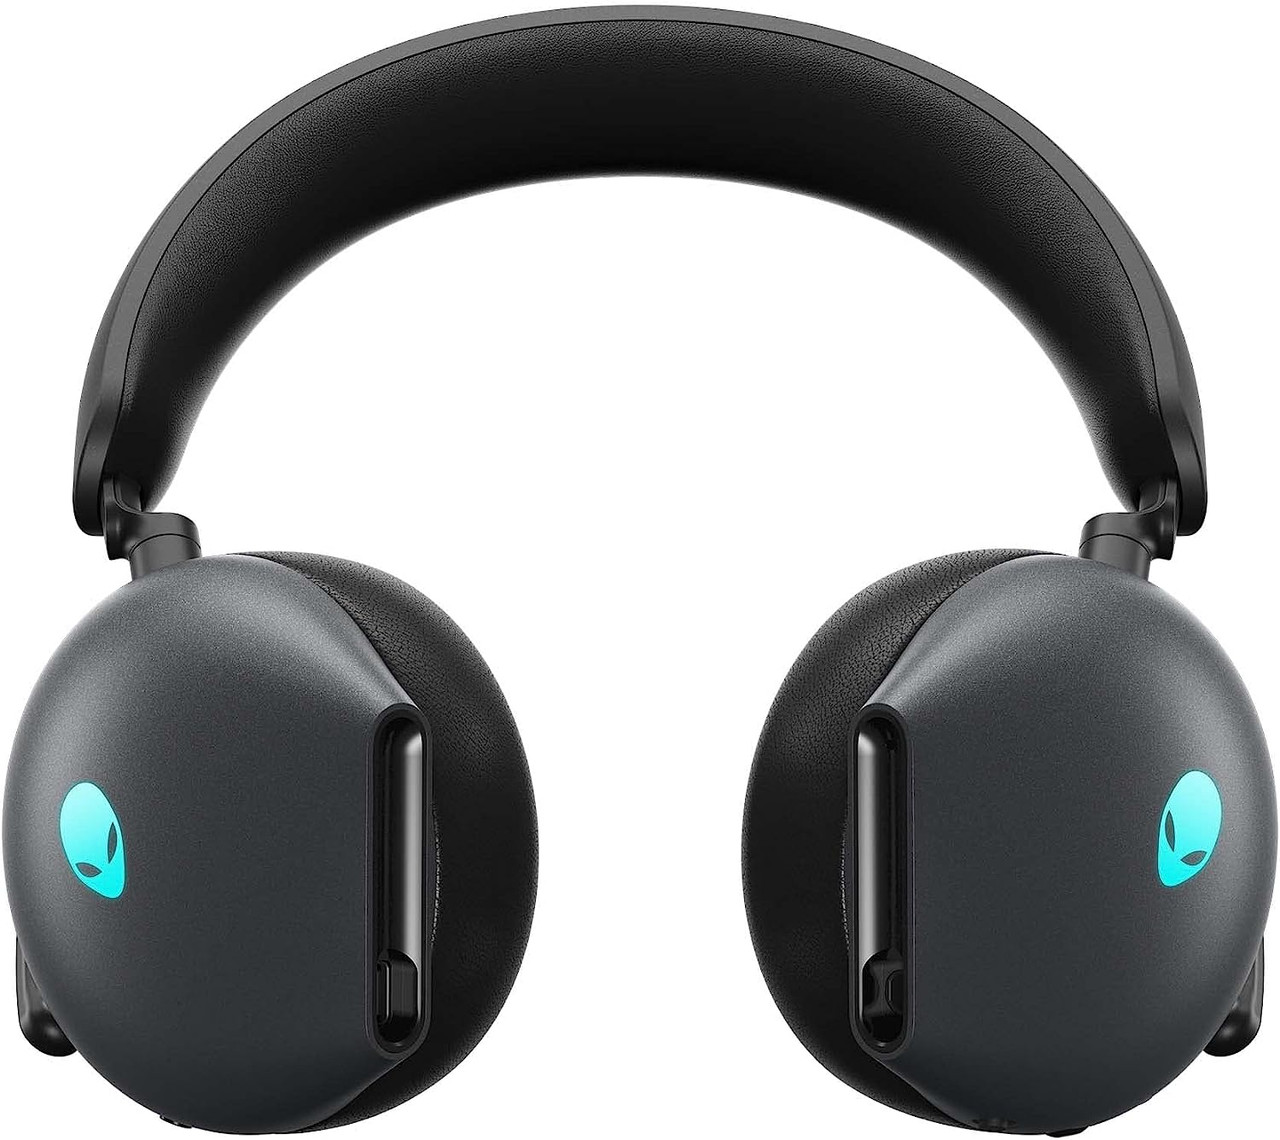 | AW920H Wireless LEBANON Gaming | COMPUTERS Alienware | Stereo Headset AYOUB